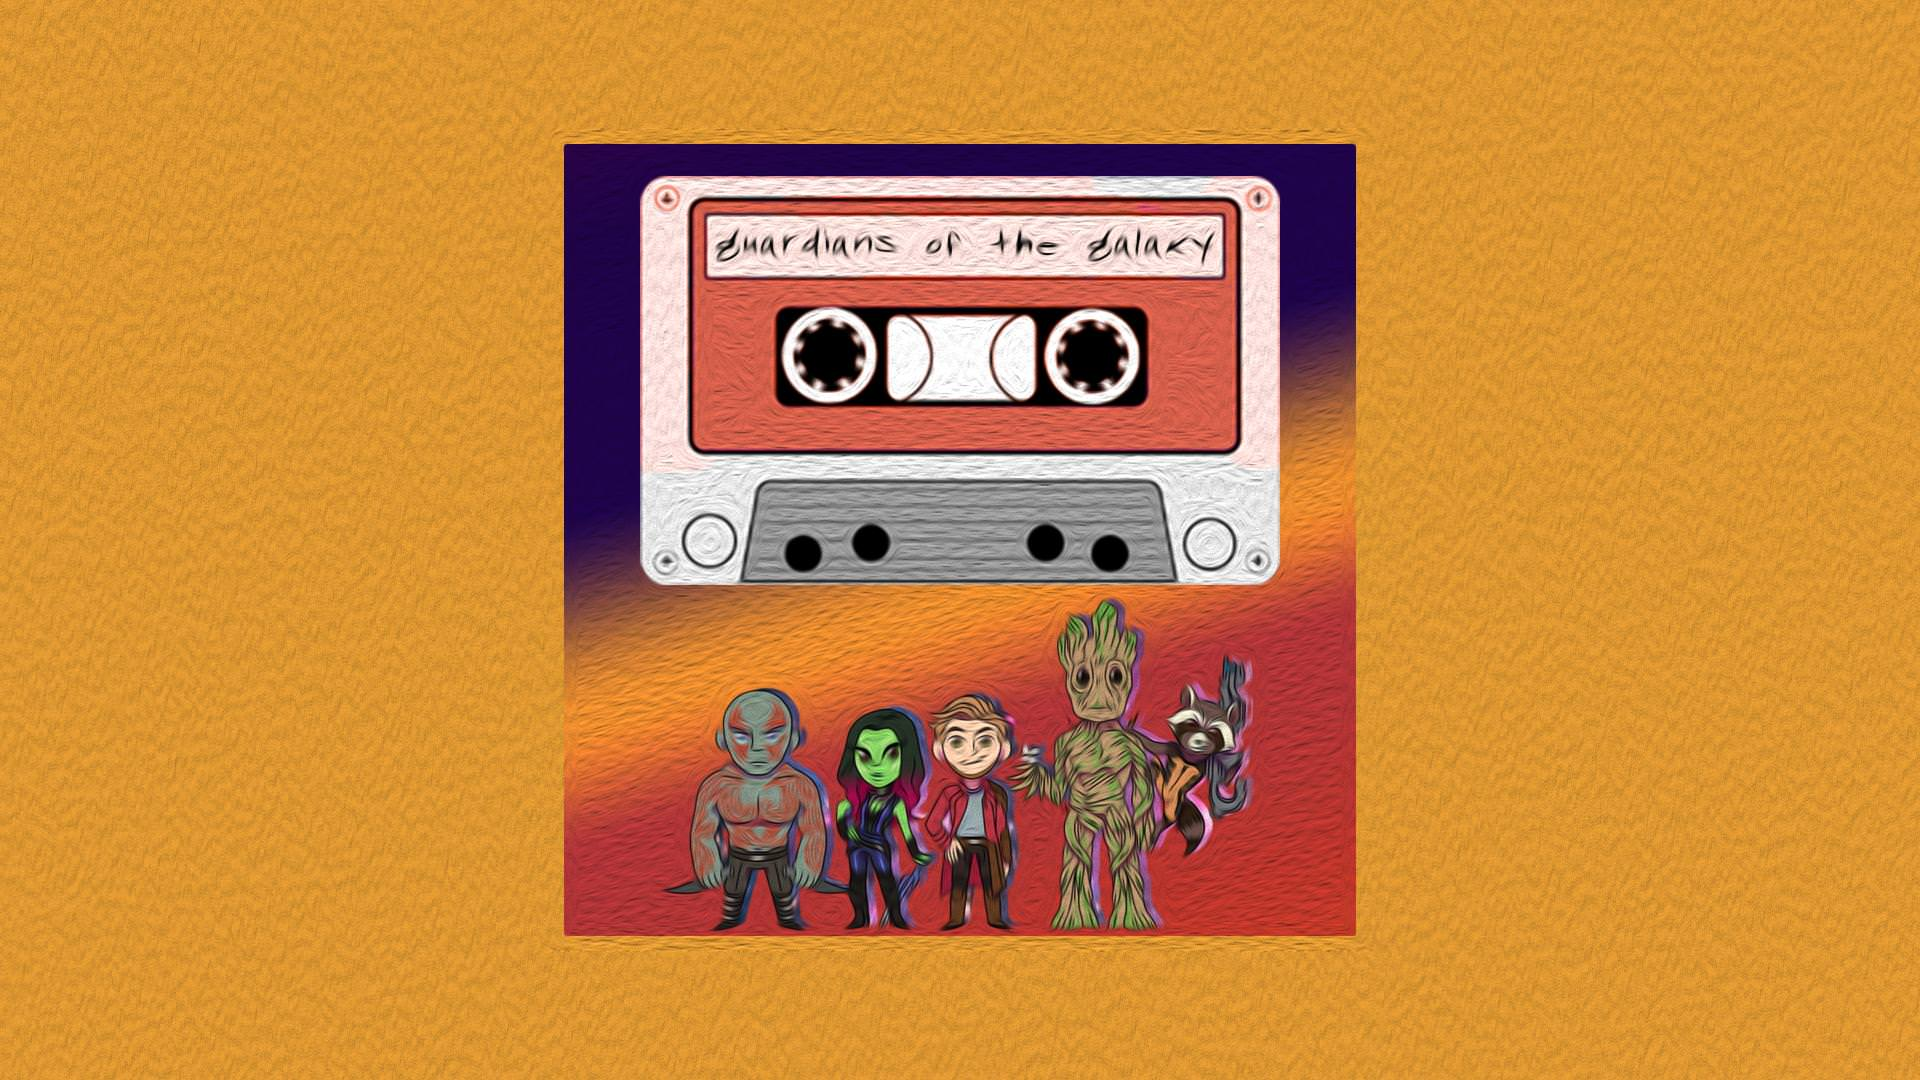 A Deeper Dive Into The Music Of Guardians Of The Galaxy By Zach Perilstein Boardwalk Times